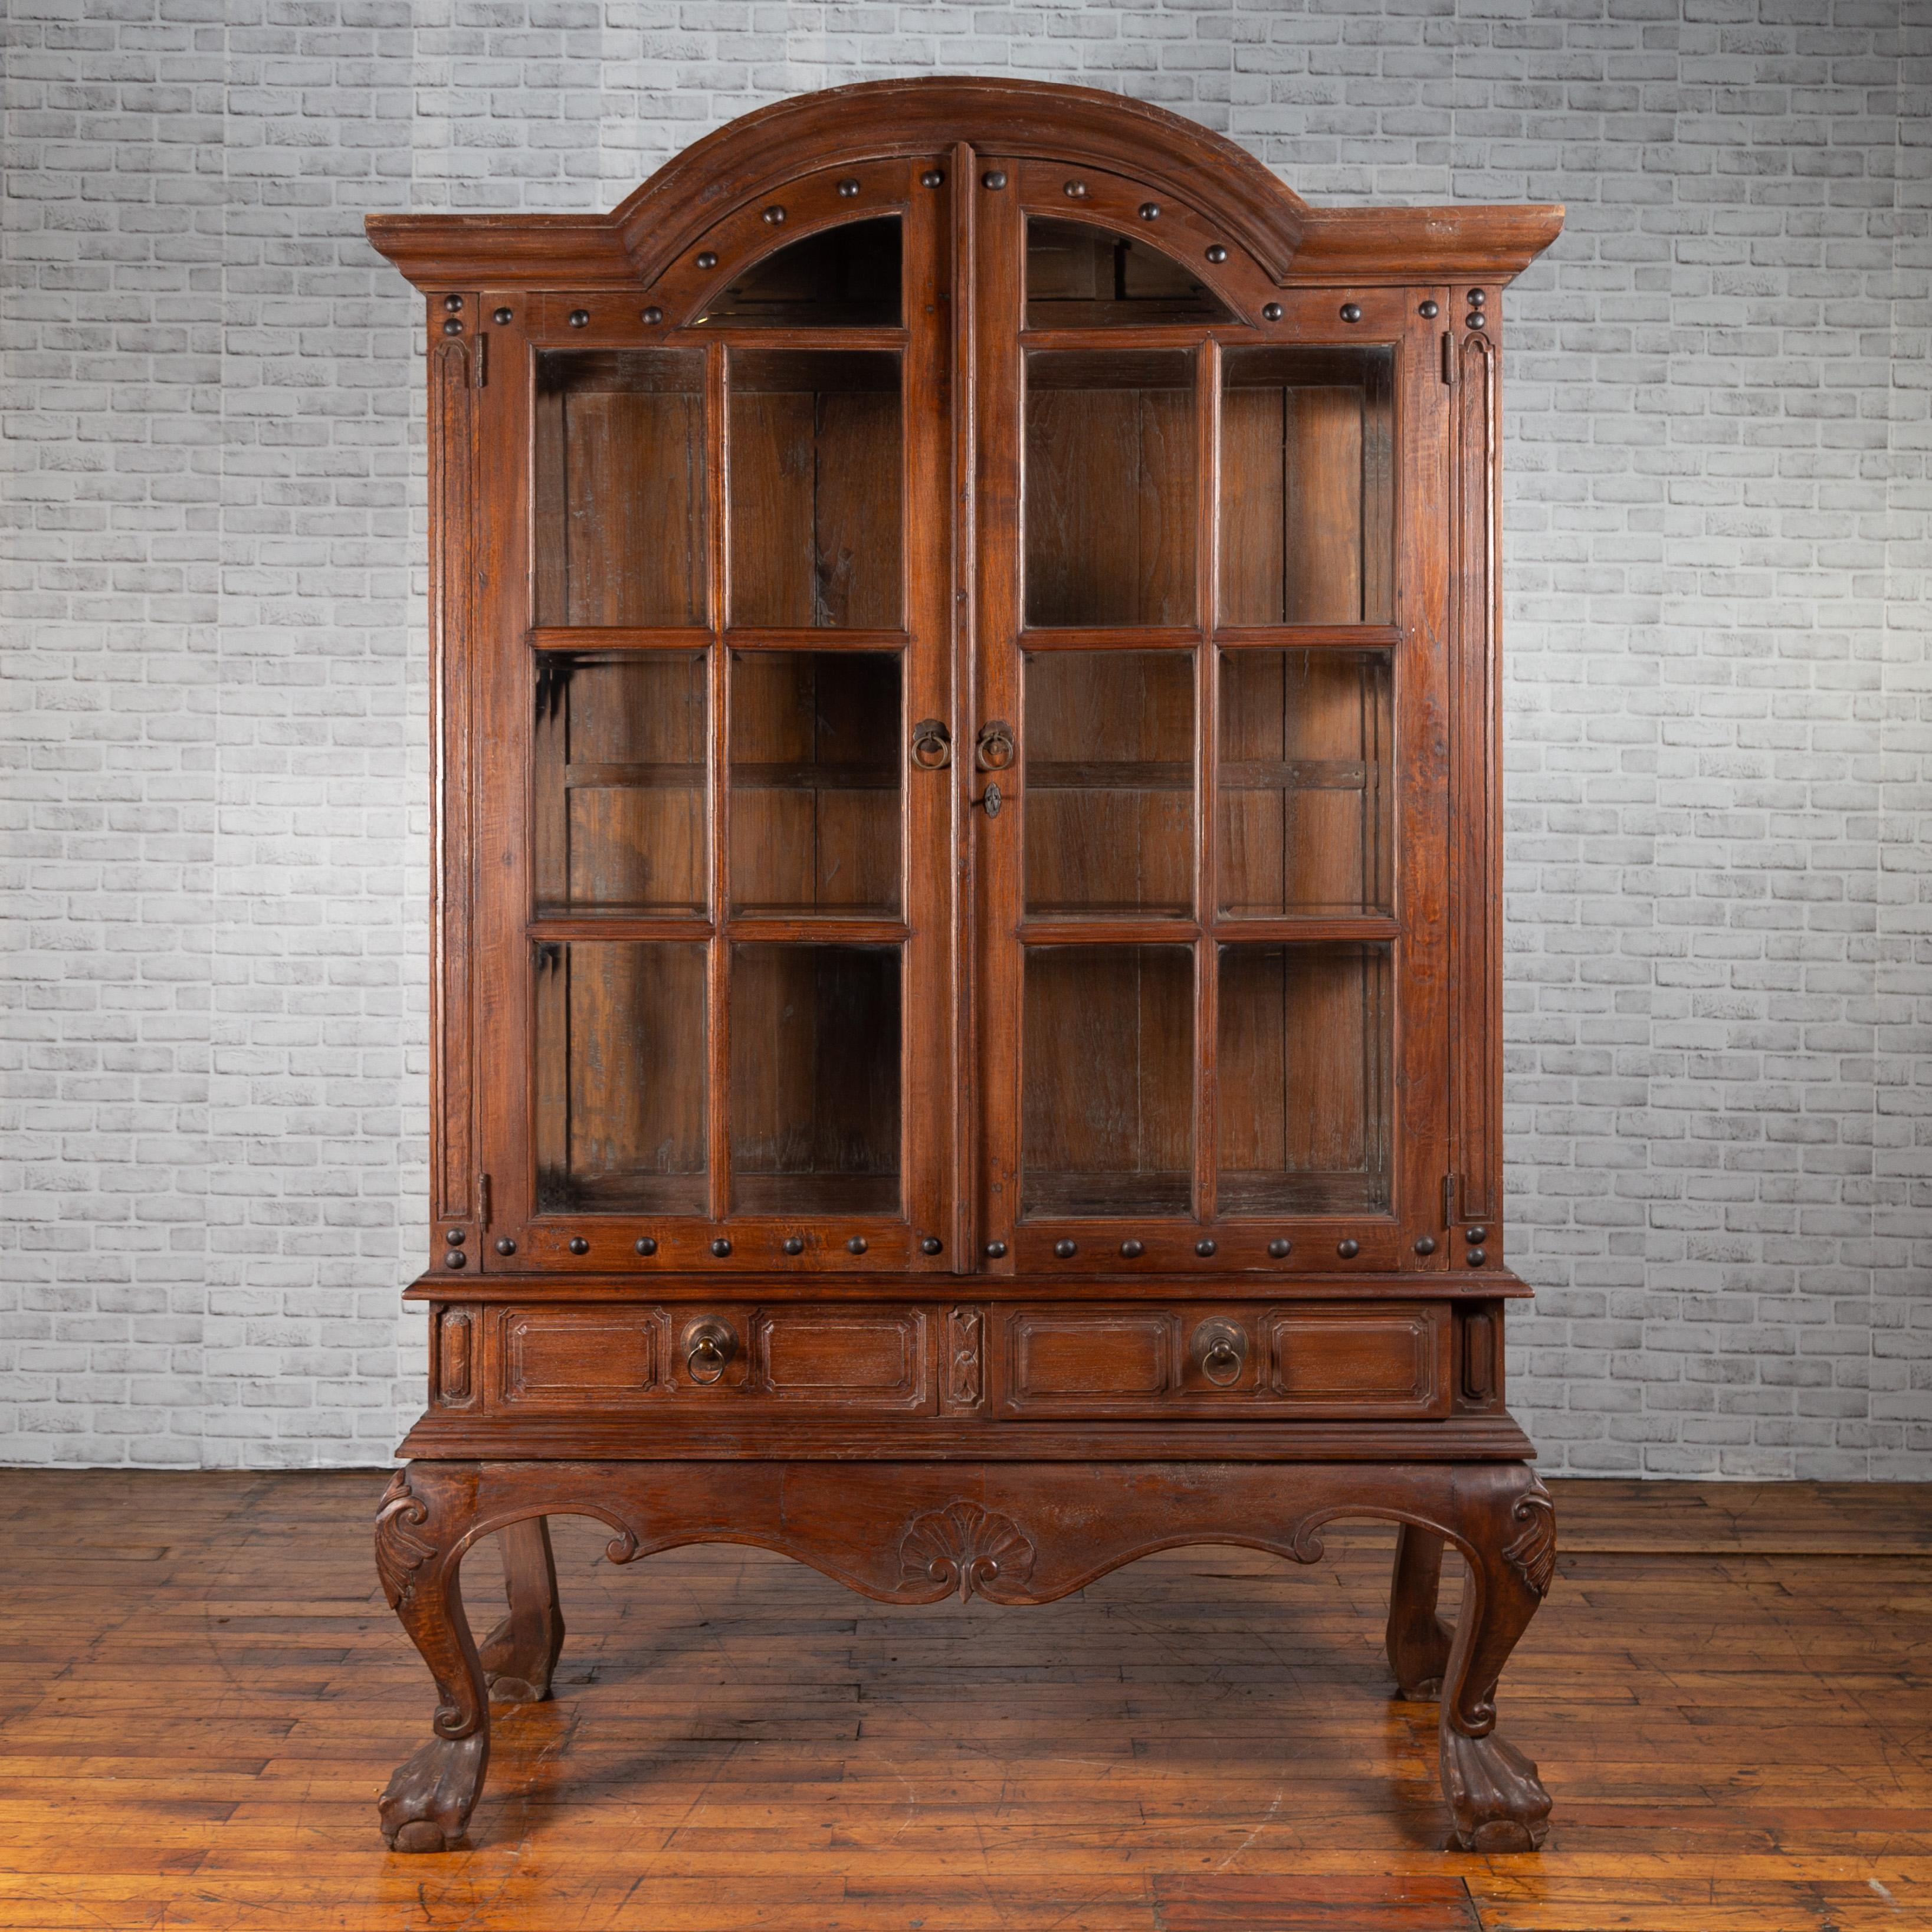 A large Dutch Colonial cabinet from Java with bonnet top, double glass doors and sides. Created in Java during the early 20th century, this large cabinet features an exquisite bonnet top, sitting above a pair of double doors with paneled glass and